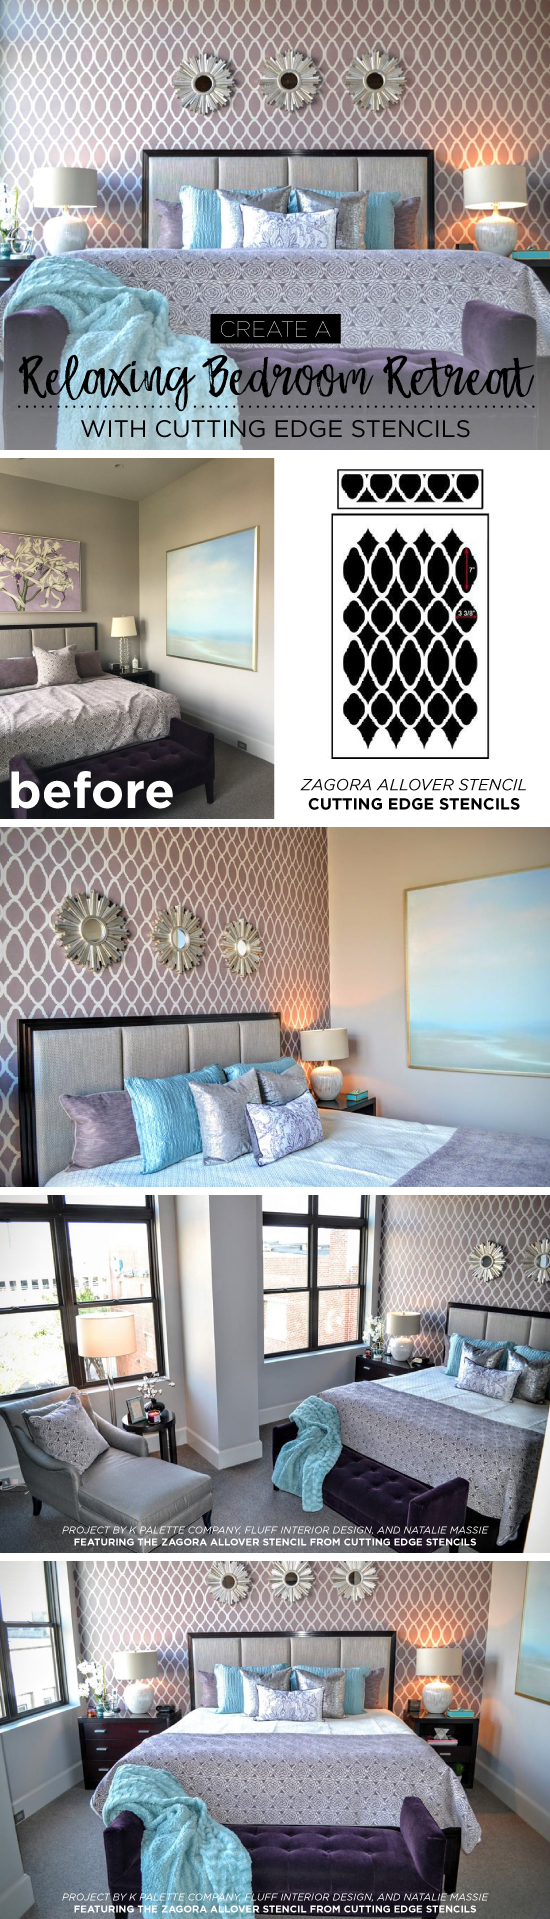 Cutting Edge Stencils shares a DIY stenciled purple bedroom accent wall using the Zagora Allover Stencil, a popular Moroccan wall pattern.  http://www.cuttingedgestencils.com/trellis-allover-stencil.html